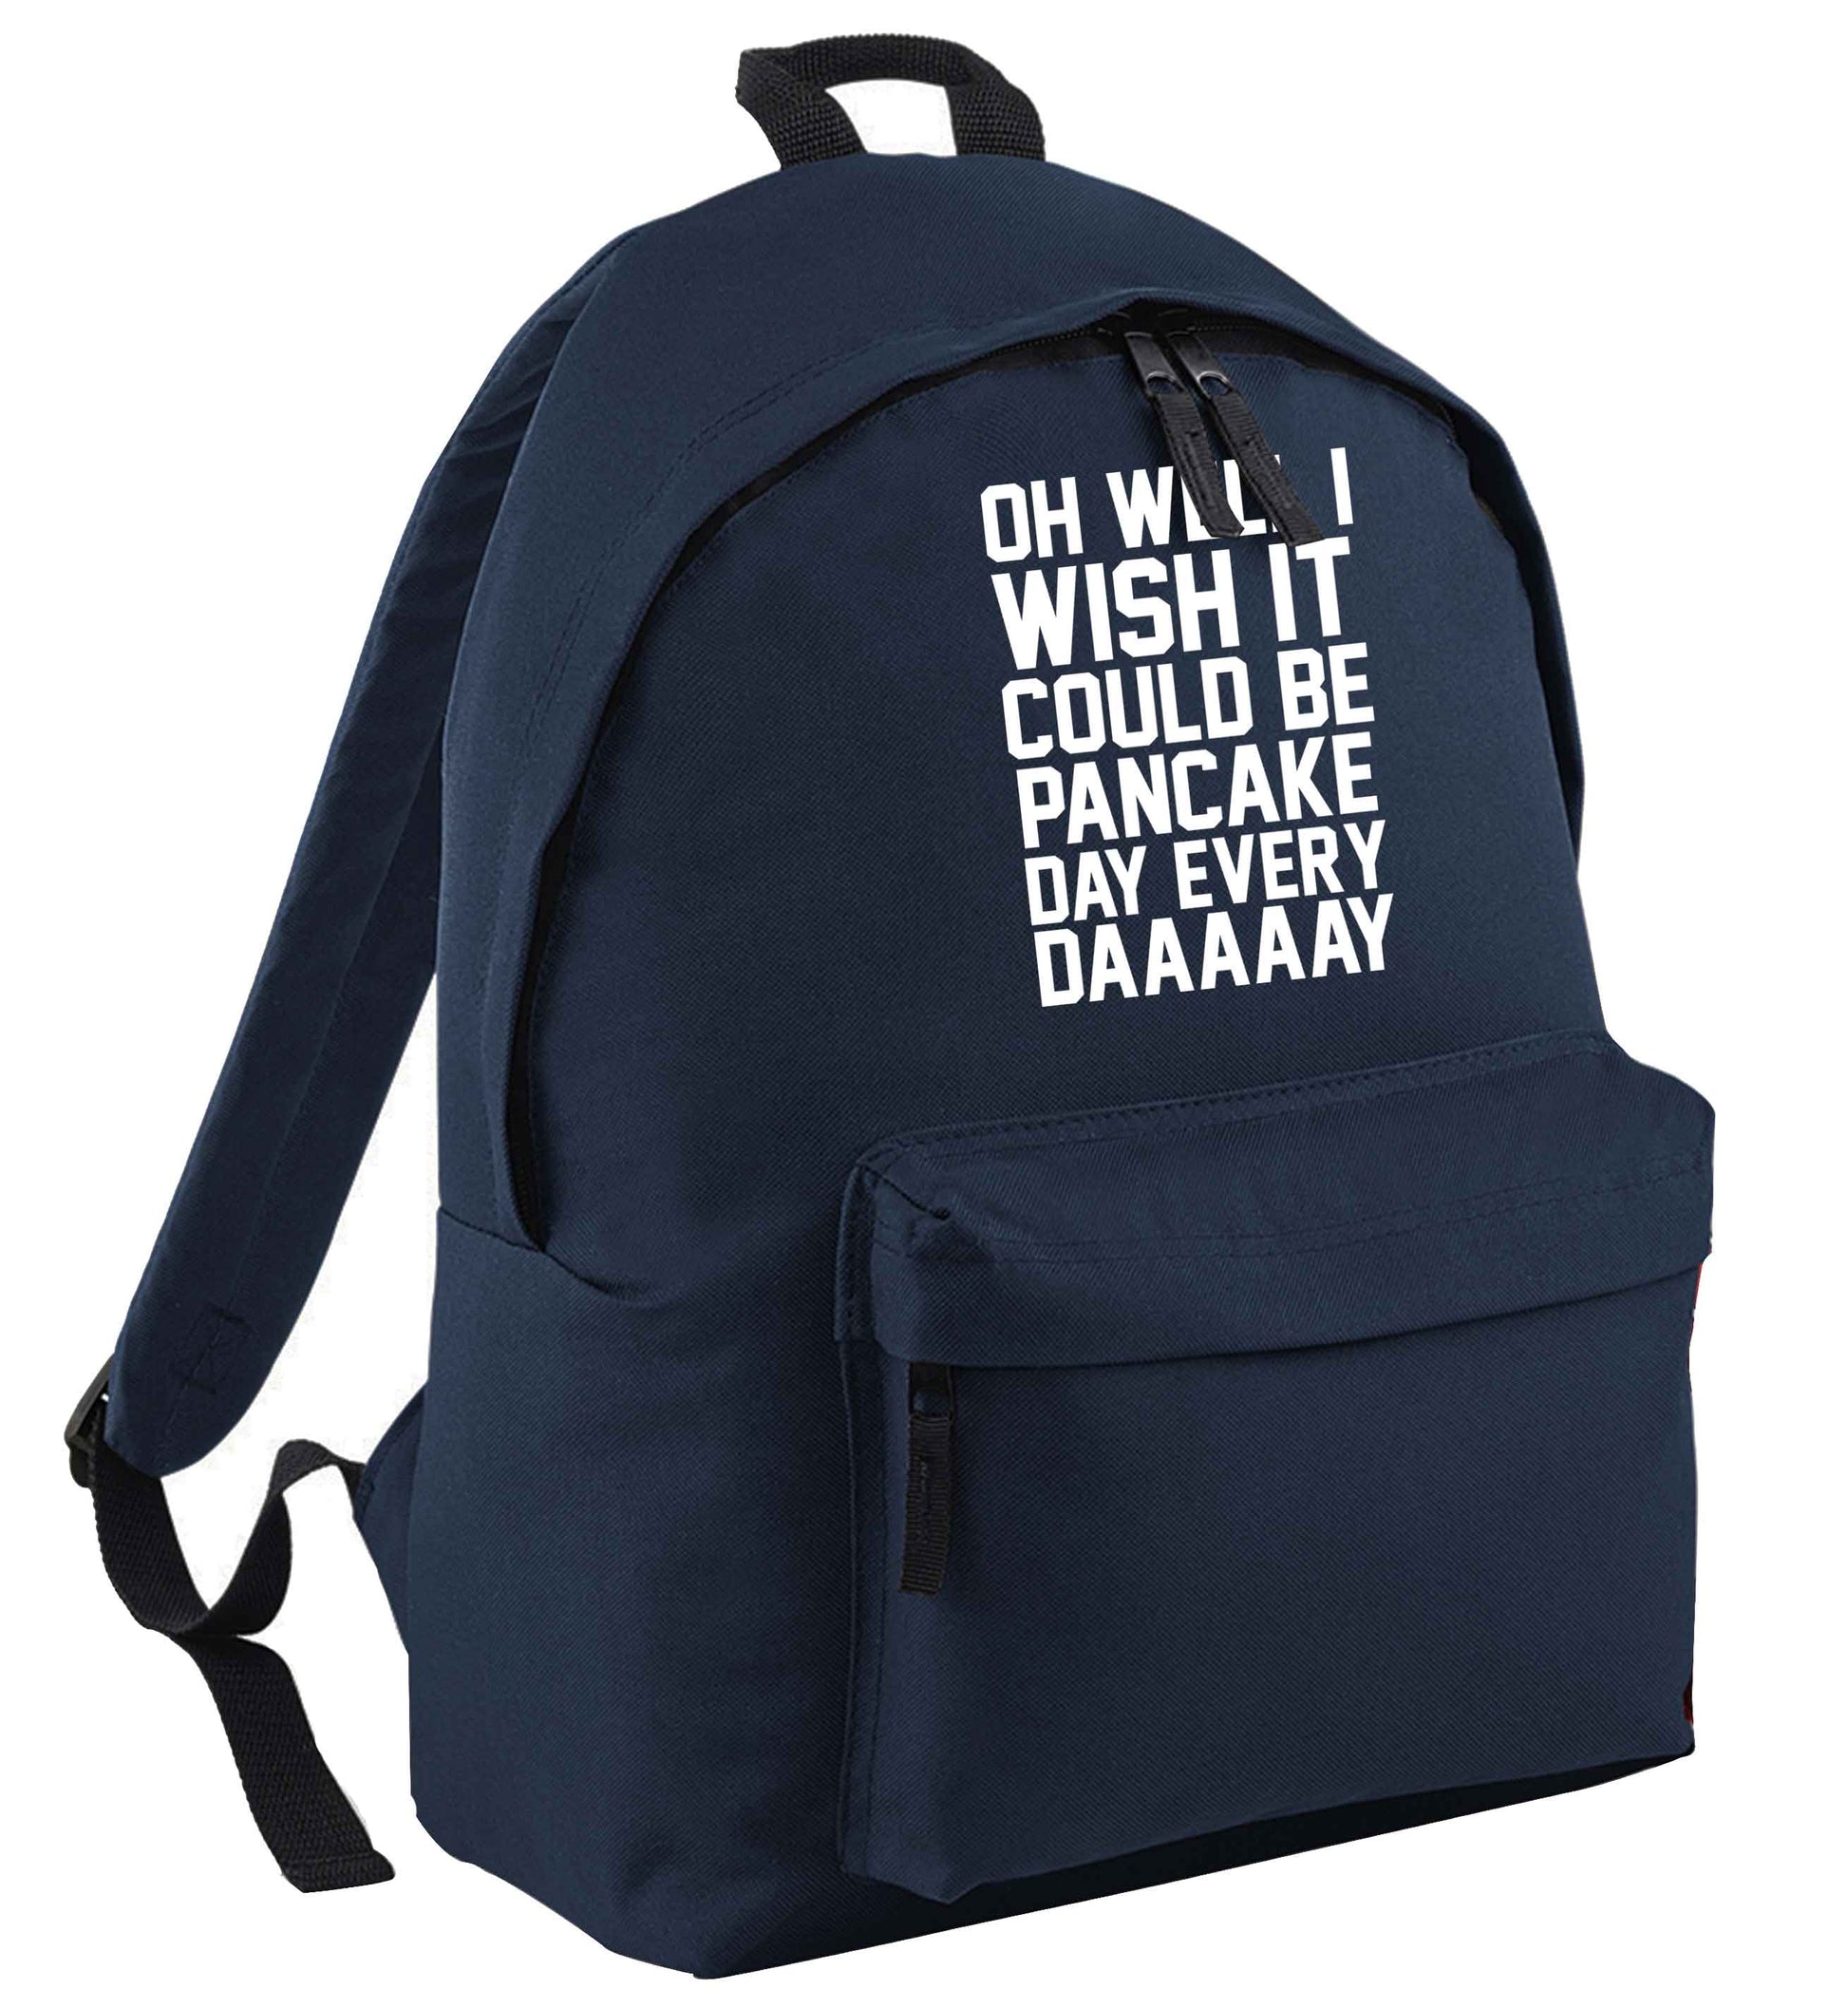 Oh well I wish it could be pancake day every day navy childrens backpack